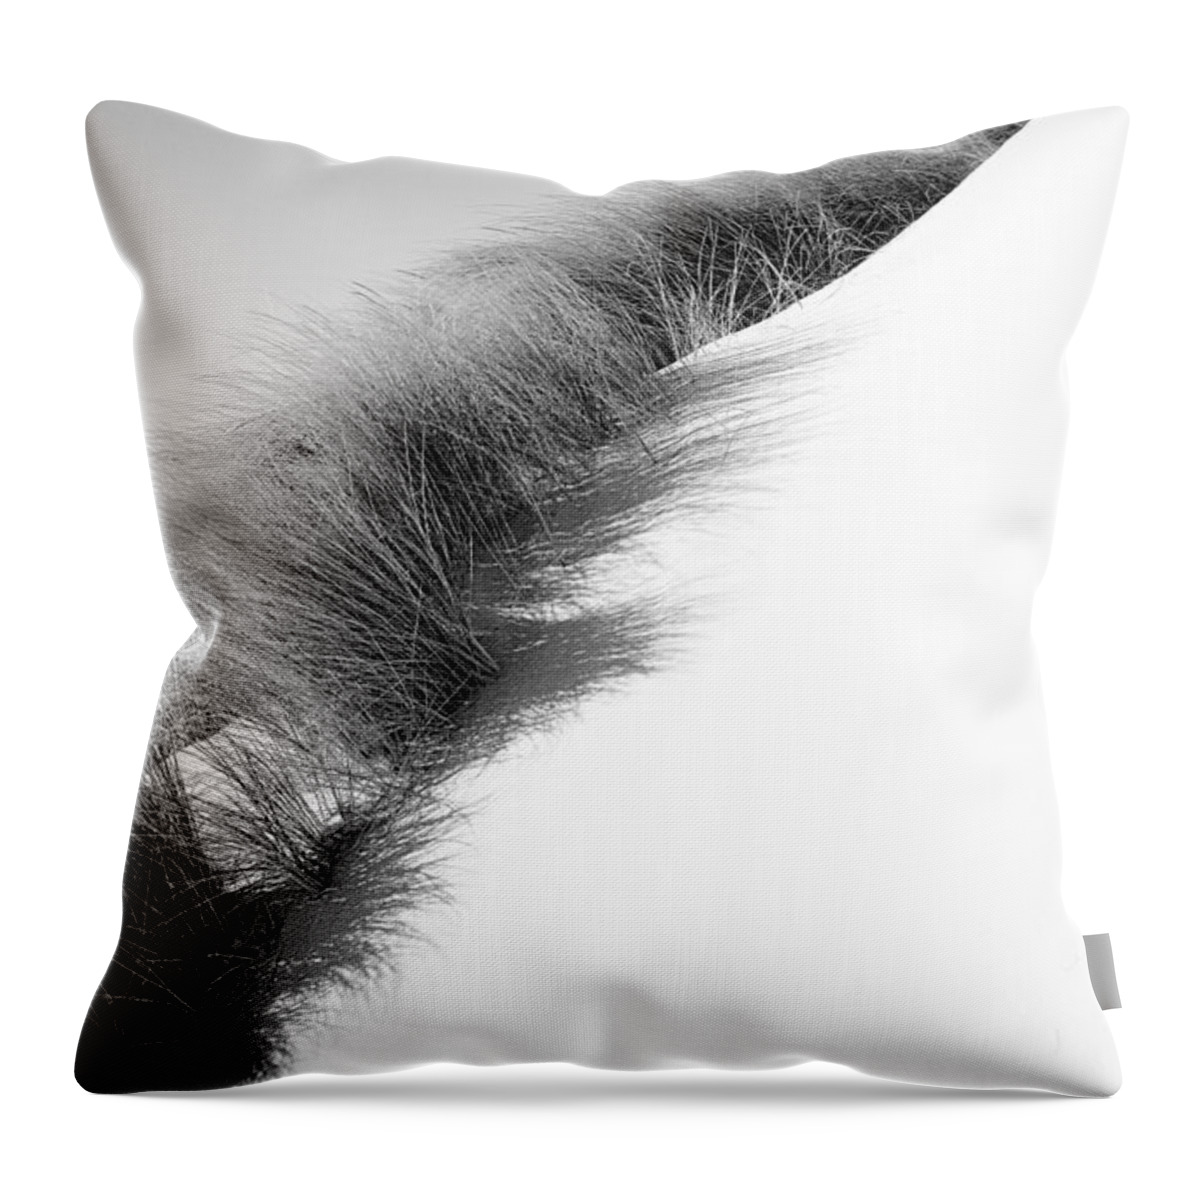 Black And White Art Throw Pillow featuring the photograph Oregon Dune by Bonnie Bruno